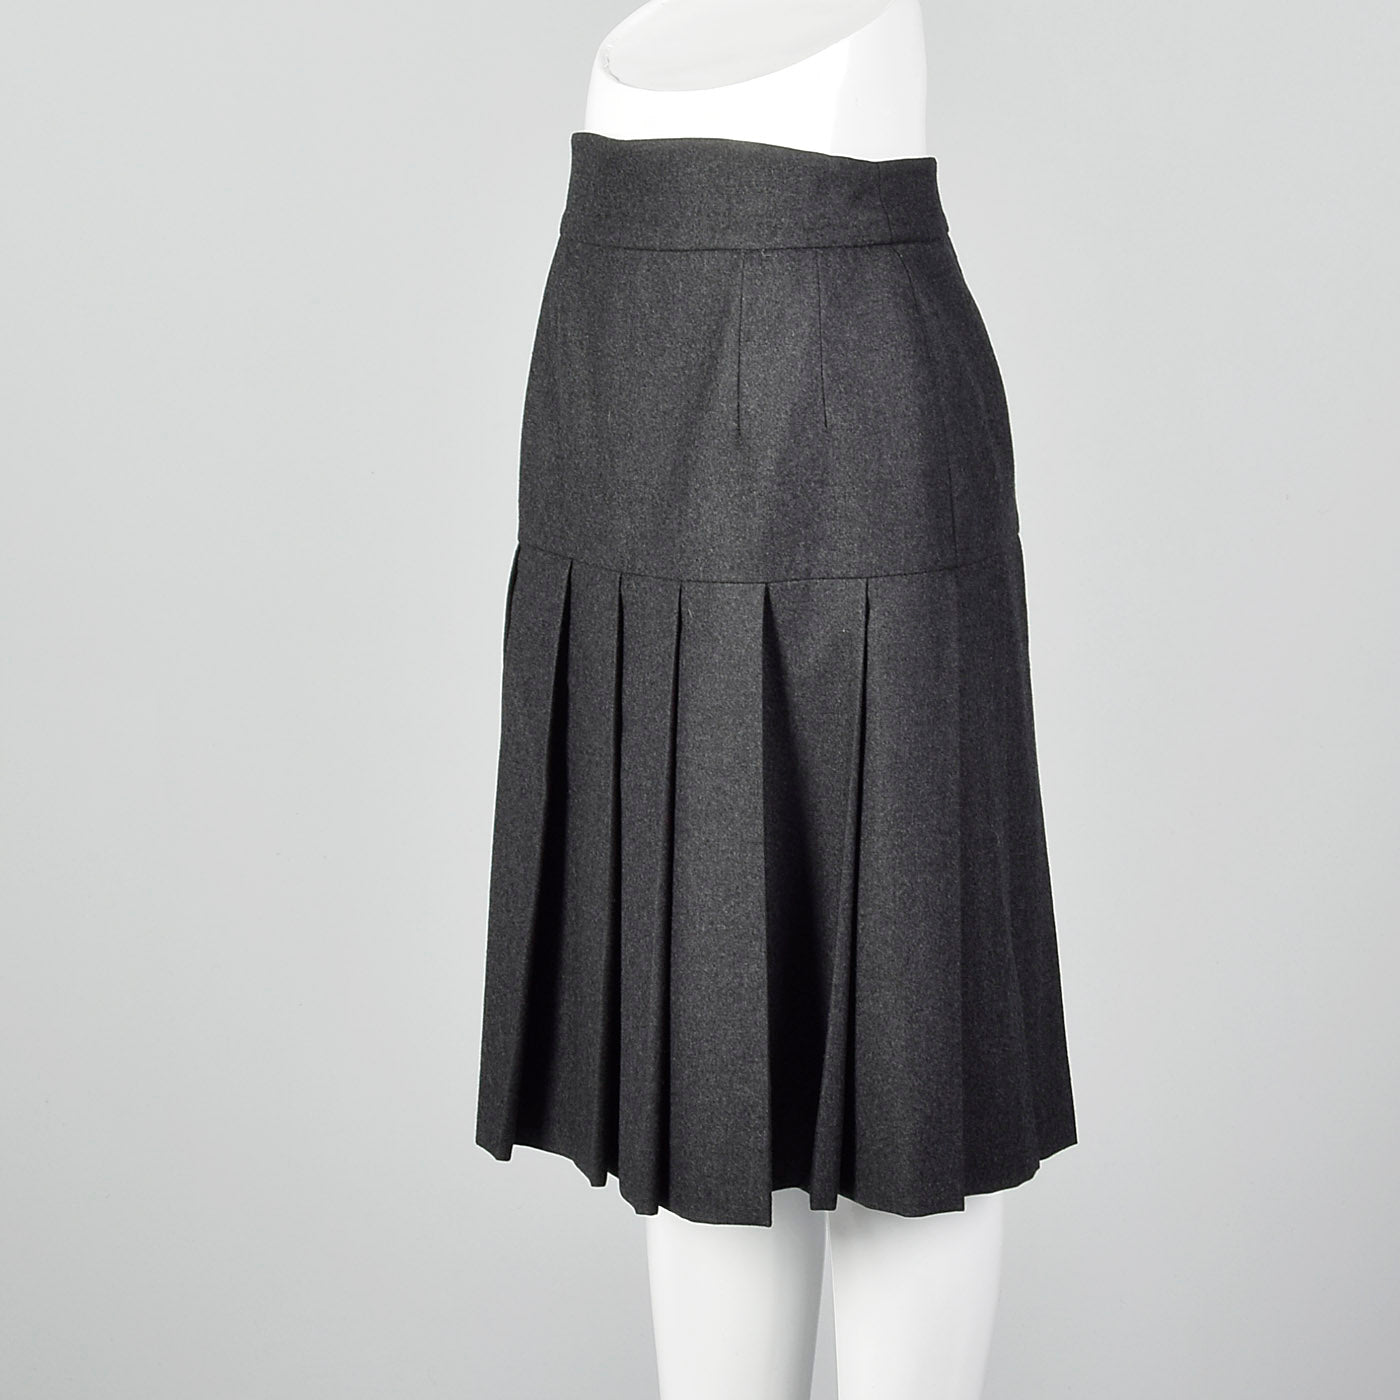 Small Chanel Boutique 1990s Gray Wool Pleated Skirt